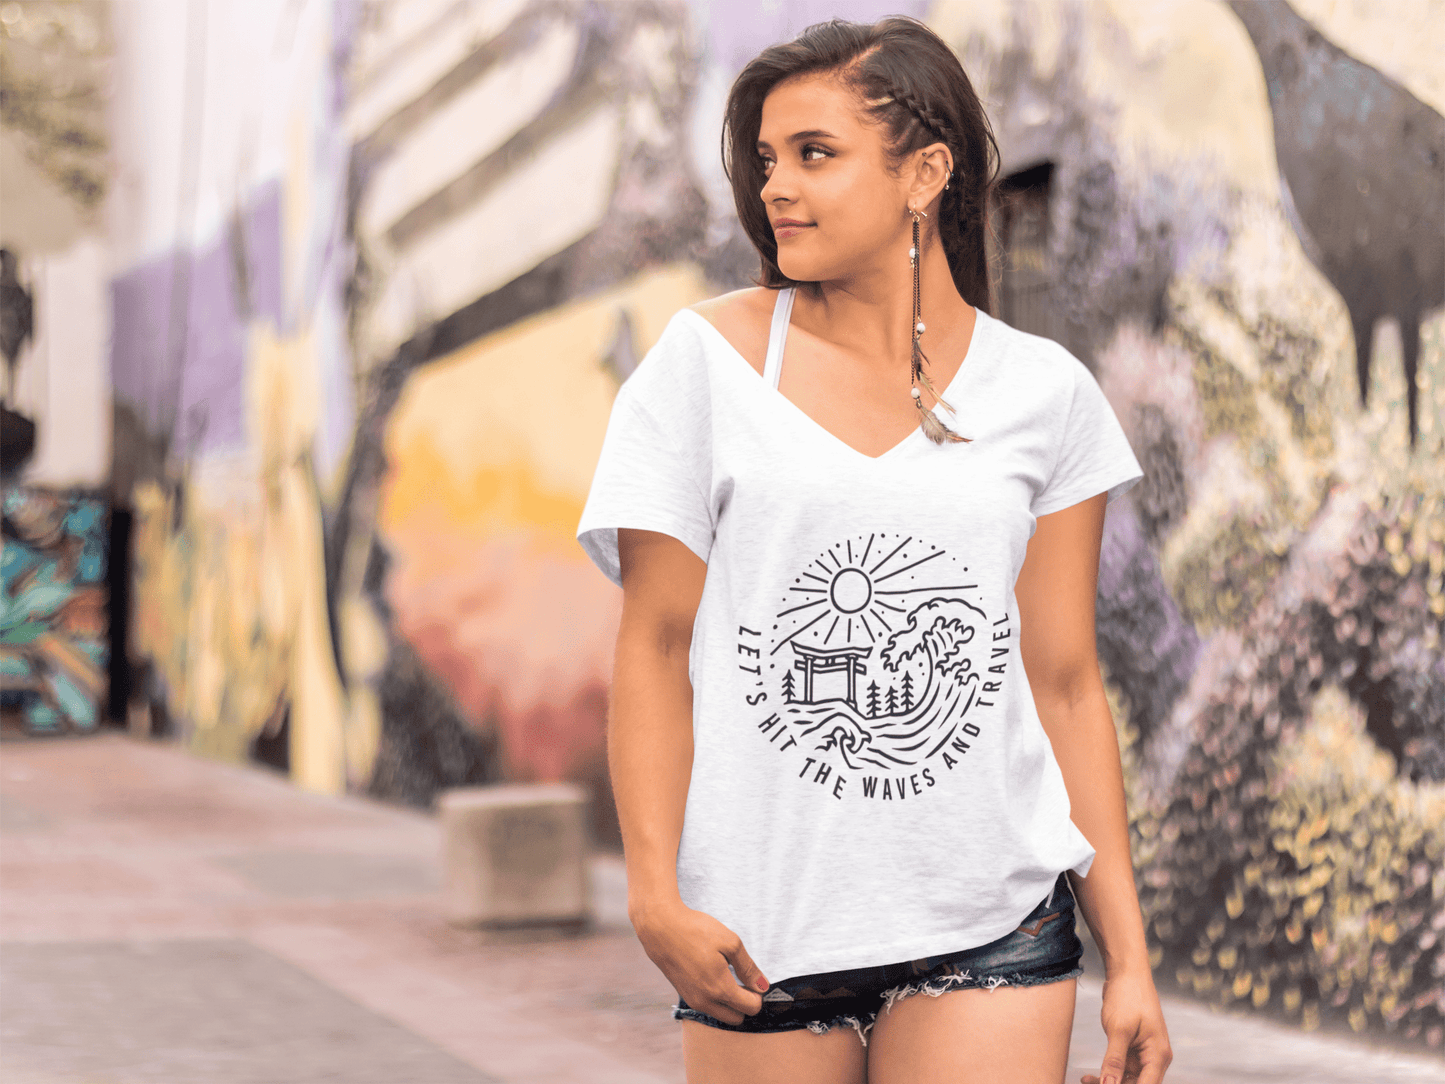 ULTRABASIC Women's Adventure T-Shirt - Let's hit the Waves and Travel - Surfing T Shirt